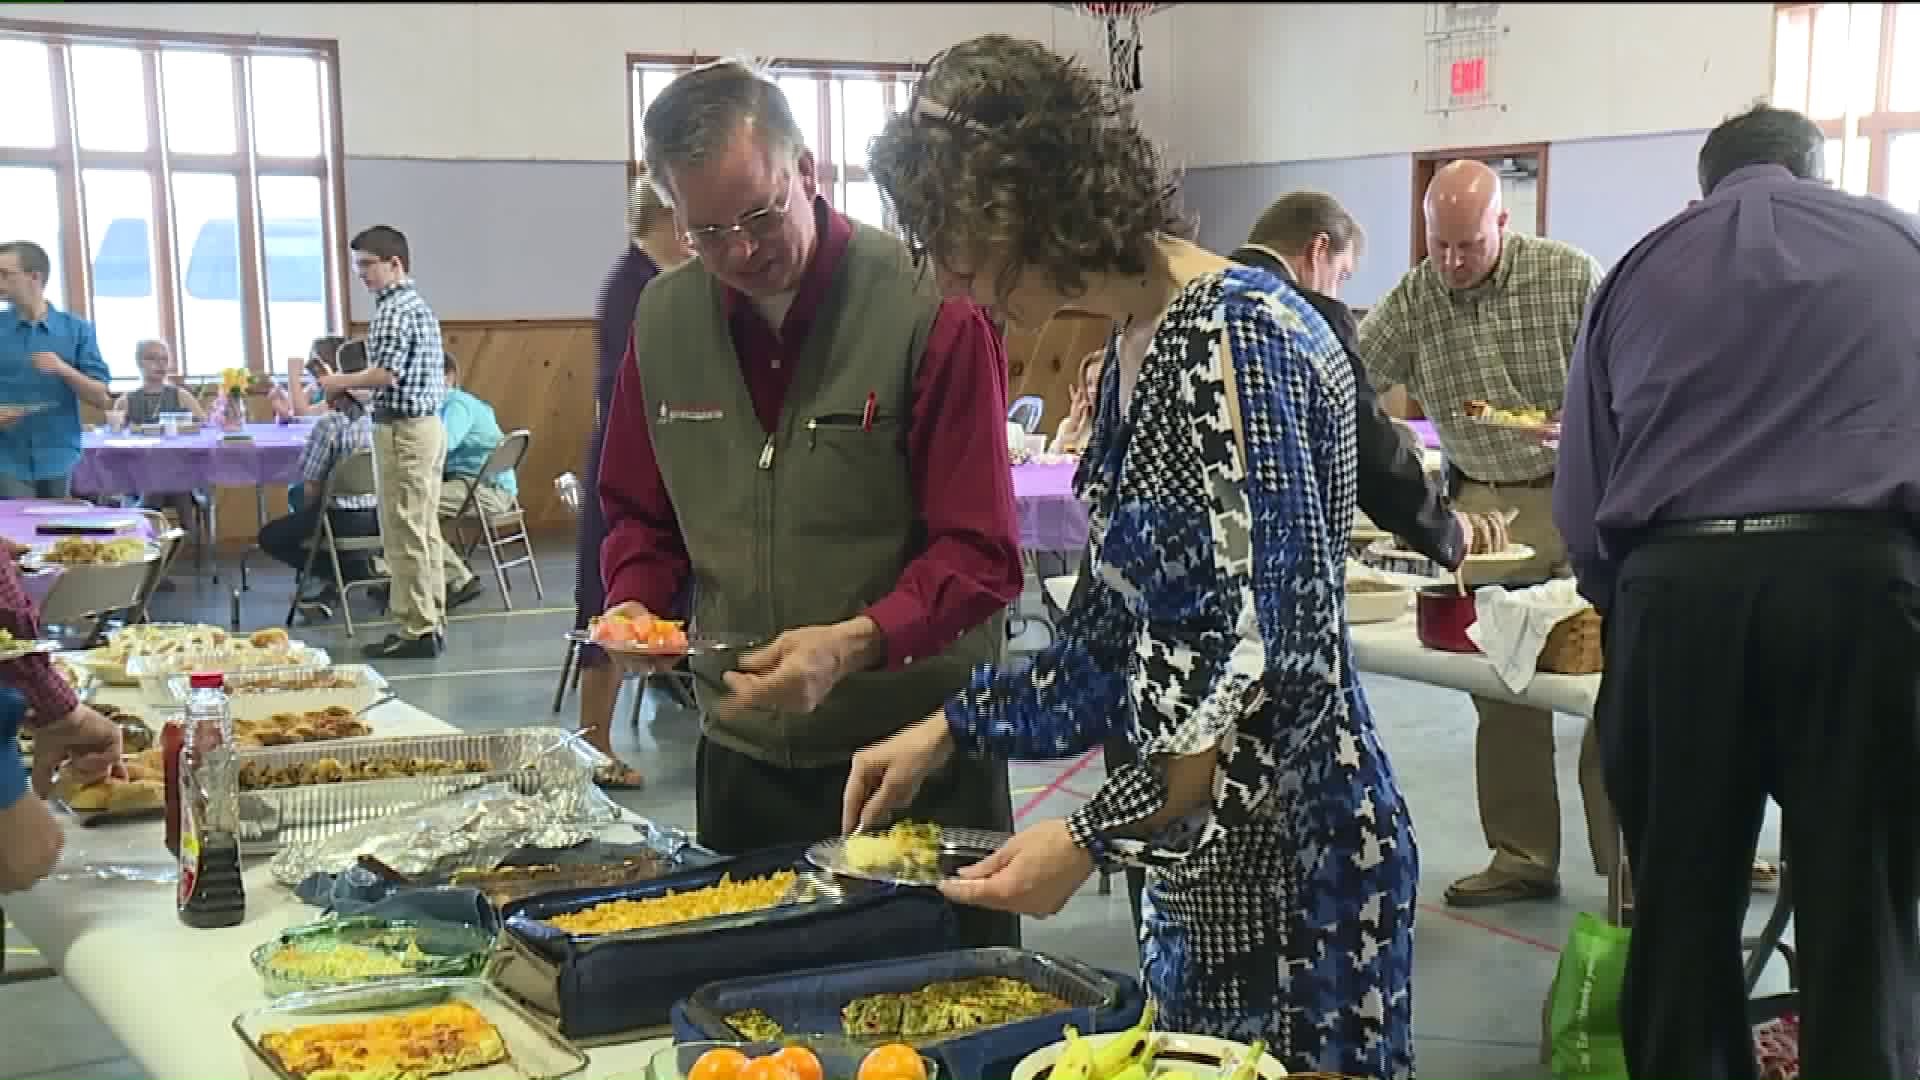 Honesdale Church Celebrates Easter with Potluck, Musical Performance